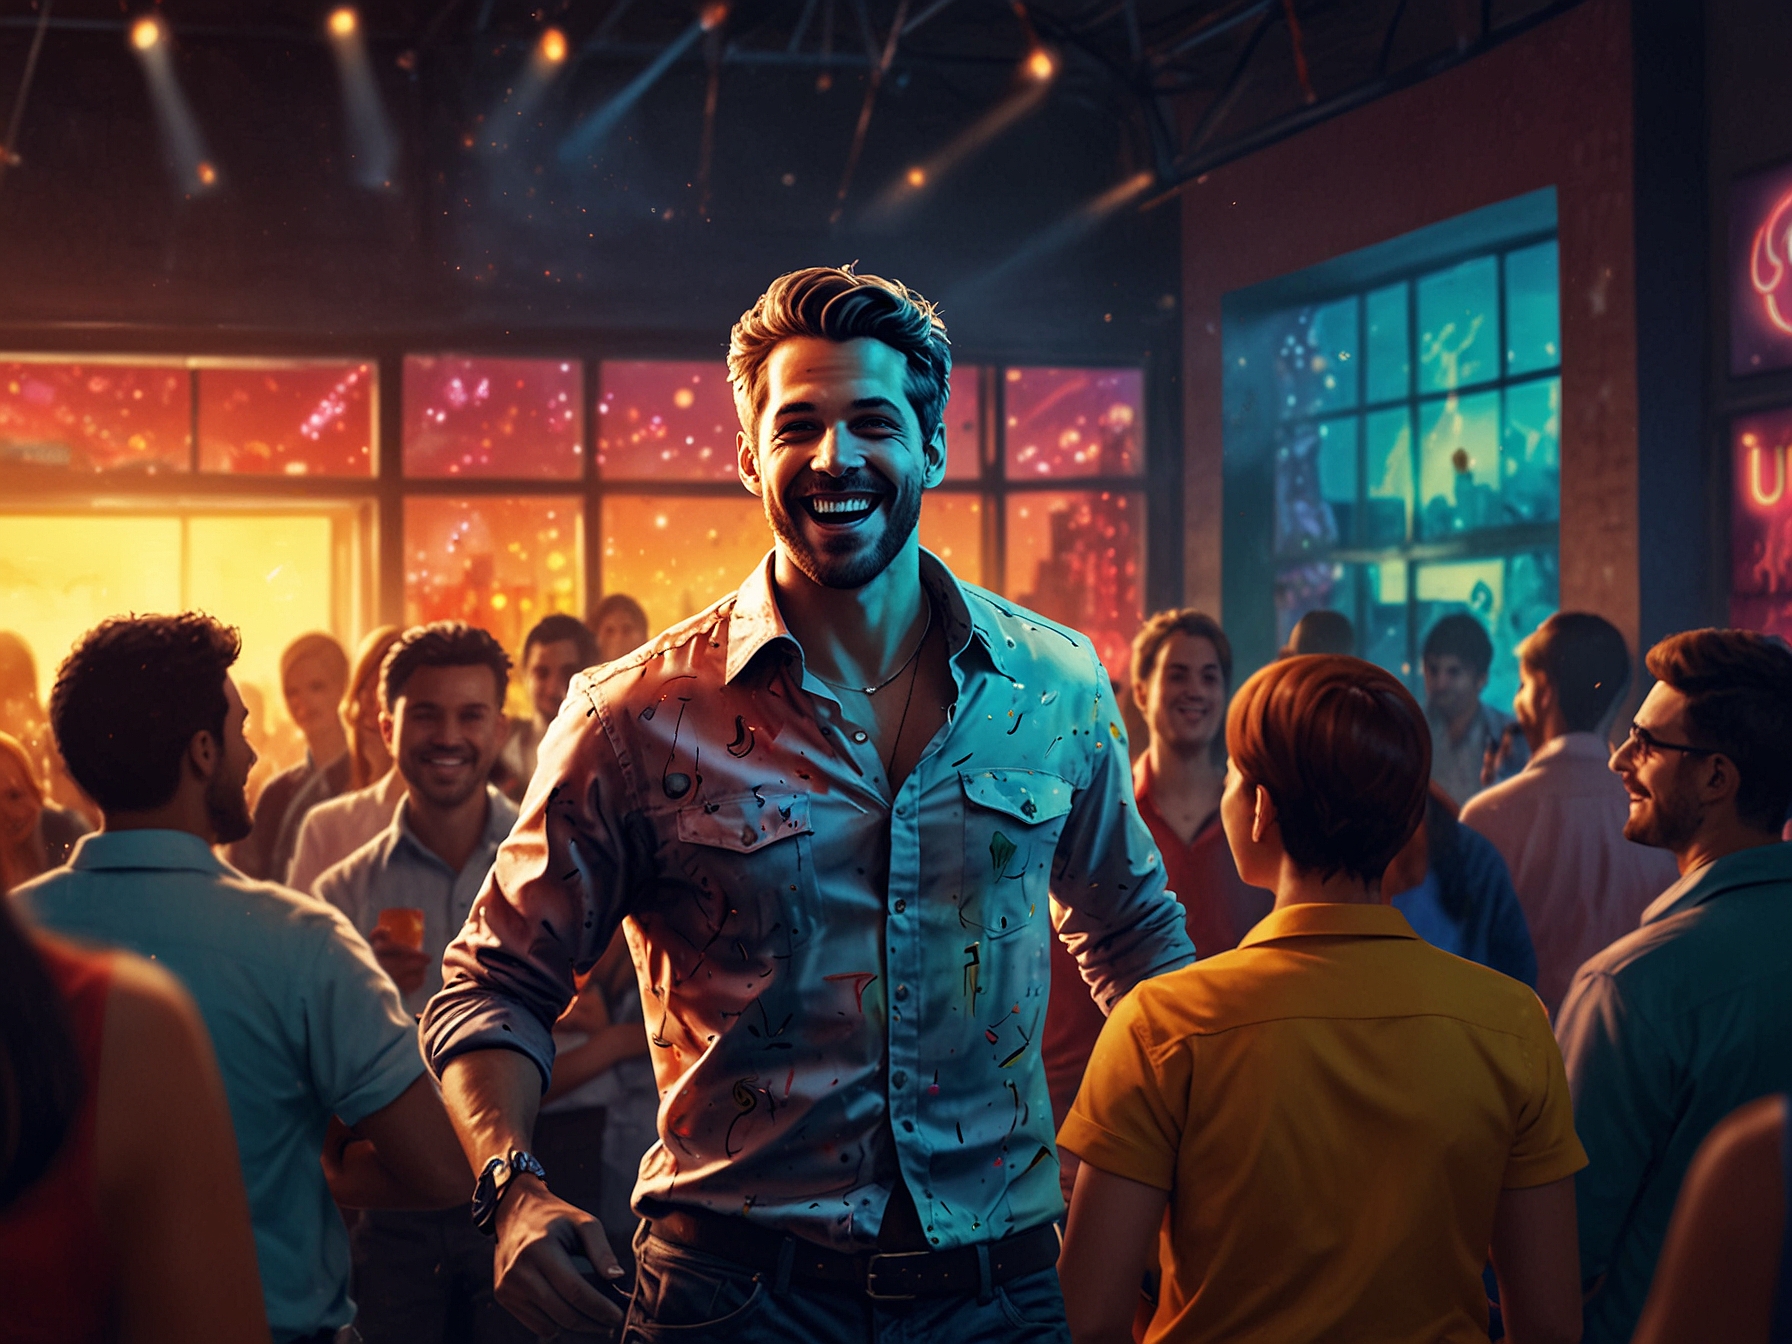 A lively nightclub scene with the central figure wearing the colorful shirt, people around him giving amused looks, highlighting the amusing fashion error.